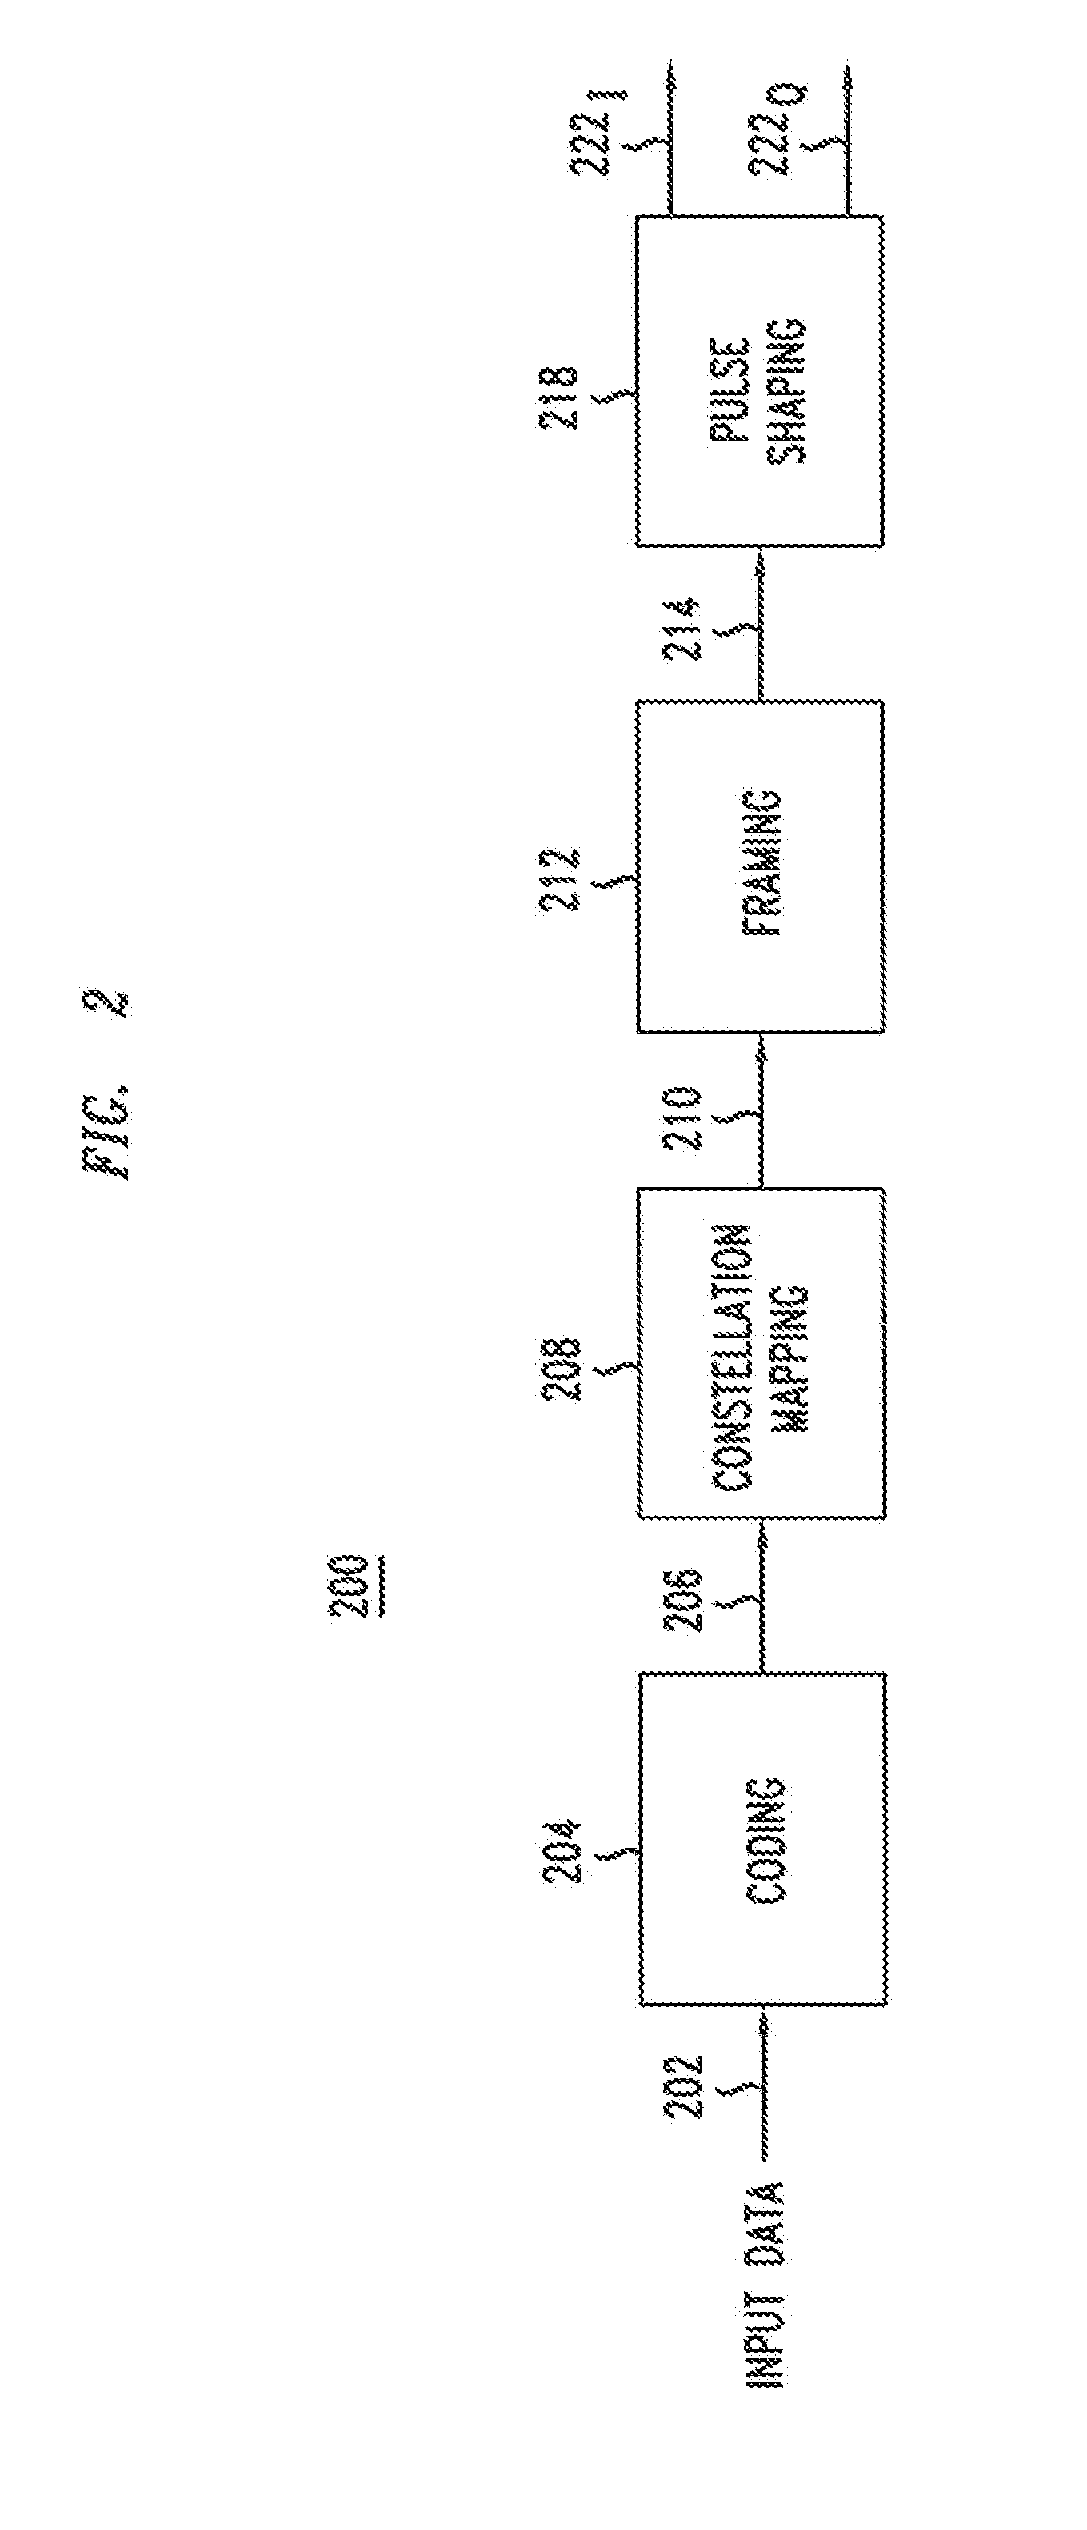 System, Method, and Apparatus for High-Sensitivity Optical Detection